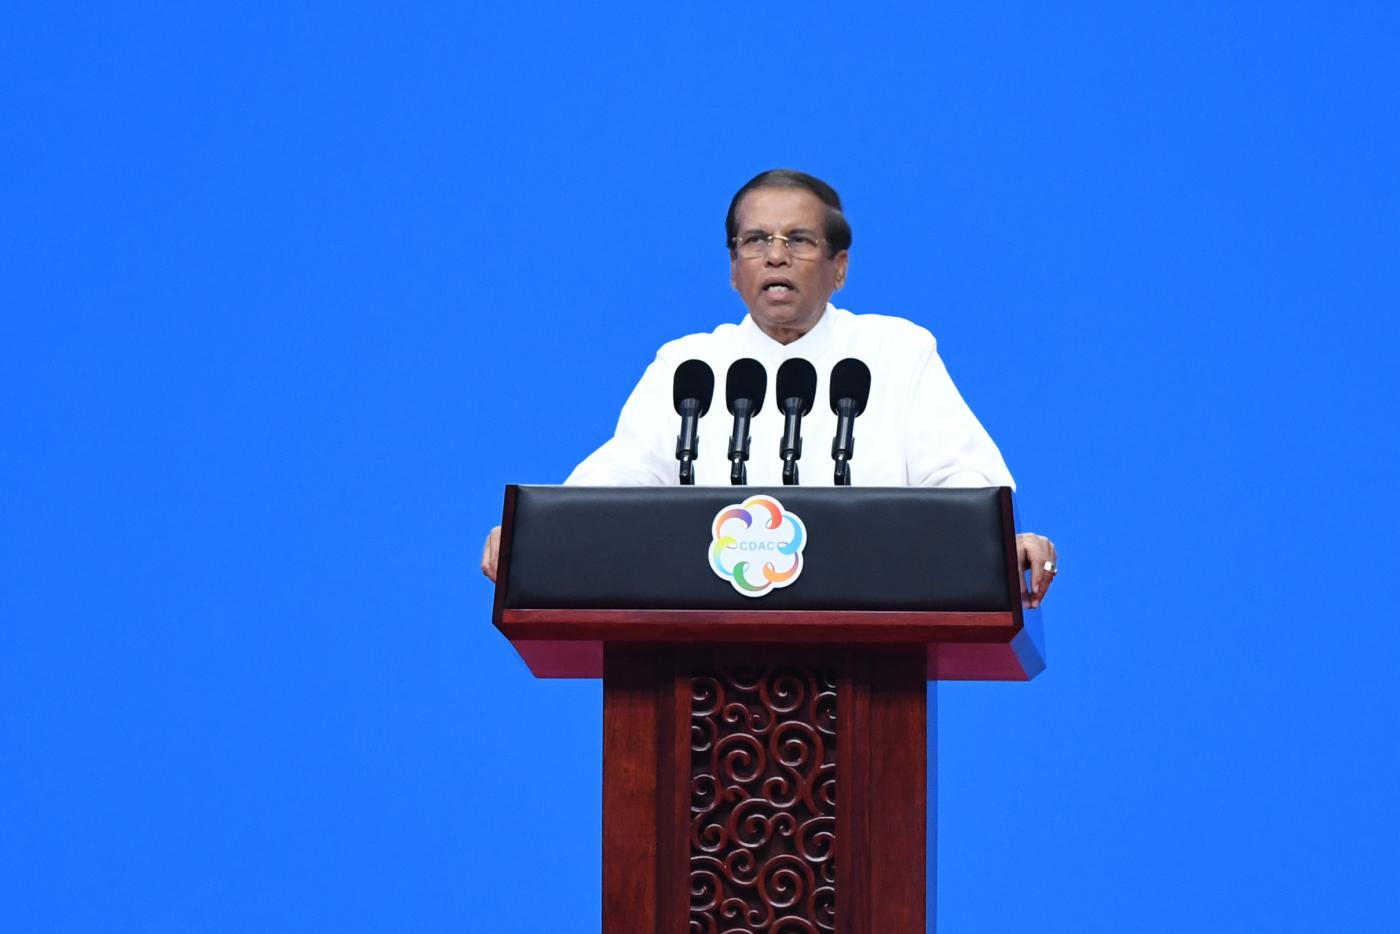 BEIJING, May 15, 2019 (Xinhua) -- Sri Lankan President Maithripala Sirisena delivers a speech at the opening ceremony of the Conference on Dialogue of Asian Civilizations (150519) at the China National Convention Center in Beijing, capital of China, May 15, 2019. (Xinhua/Ju Huanzong/IANS) by .